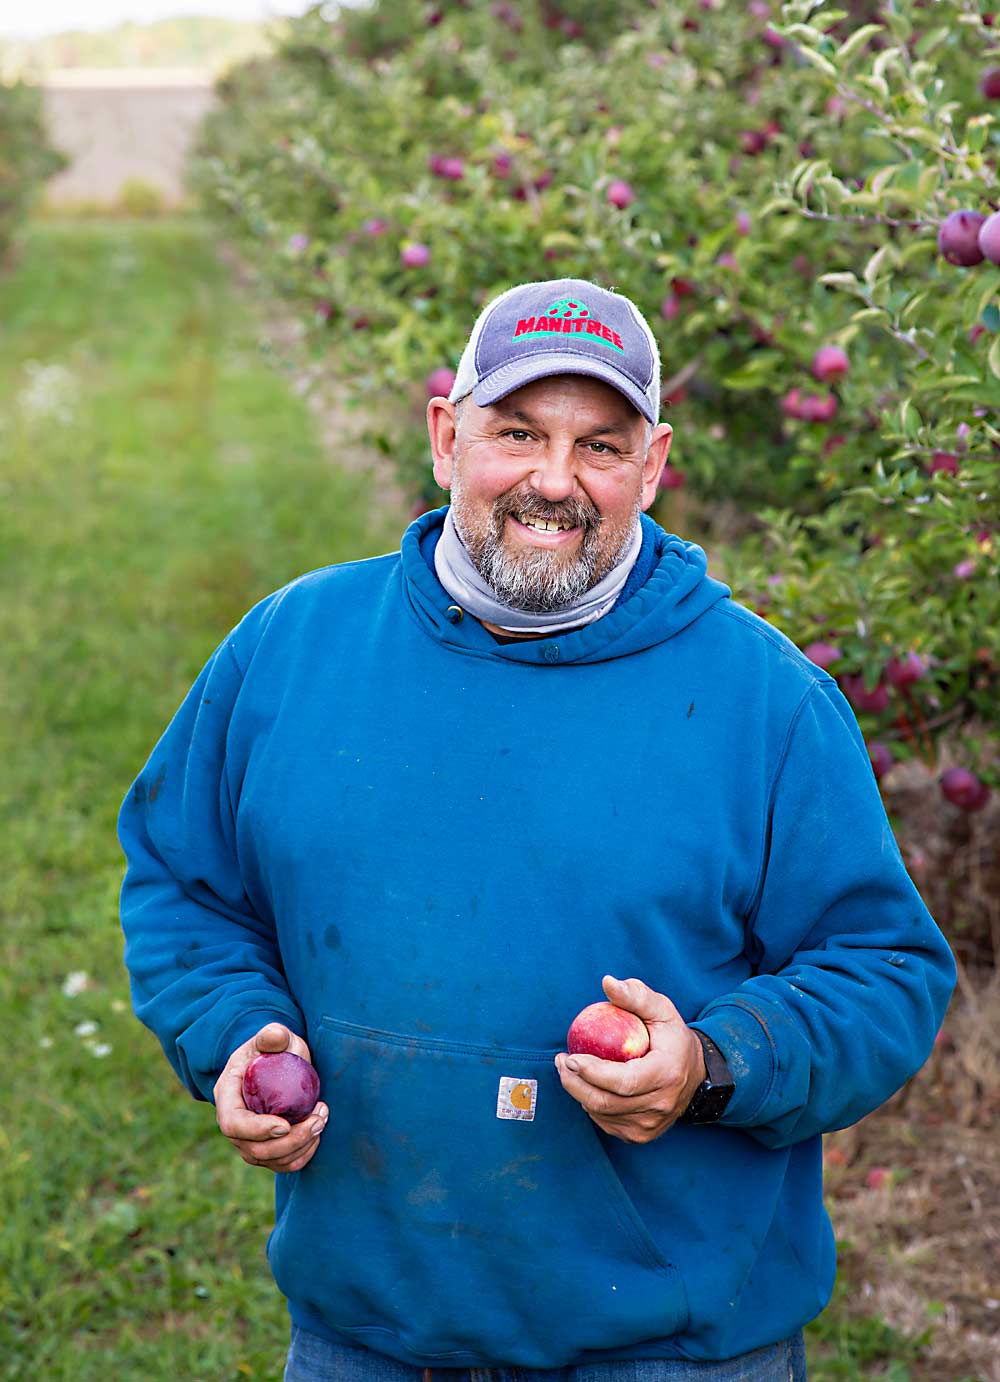 At Manitree Fruit Farms near Blenheim, Ontario, Brian Rideout uses a number of water-management approaches on his 400-plus acres. All of his orchards, which include 140 acres in apples, 60 in peaches, 20 in pears and 25–30 in tart cherries, are equipped with drain tiles, set 2–3 feet deep and spaced 24–30 feet apart. To prevent compaction due to increasing use of heavy equipment in the orchard, he adjusts tire widths to reduce rutting and filling remaining ruts with wood chips. (Courtesy Brian Rideout/Manitree Fruit Farms)